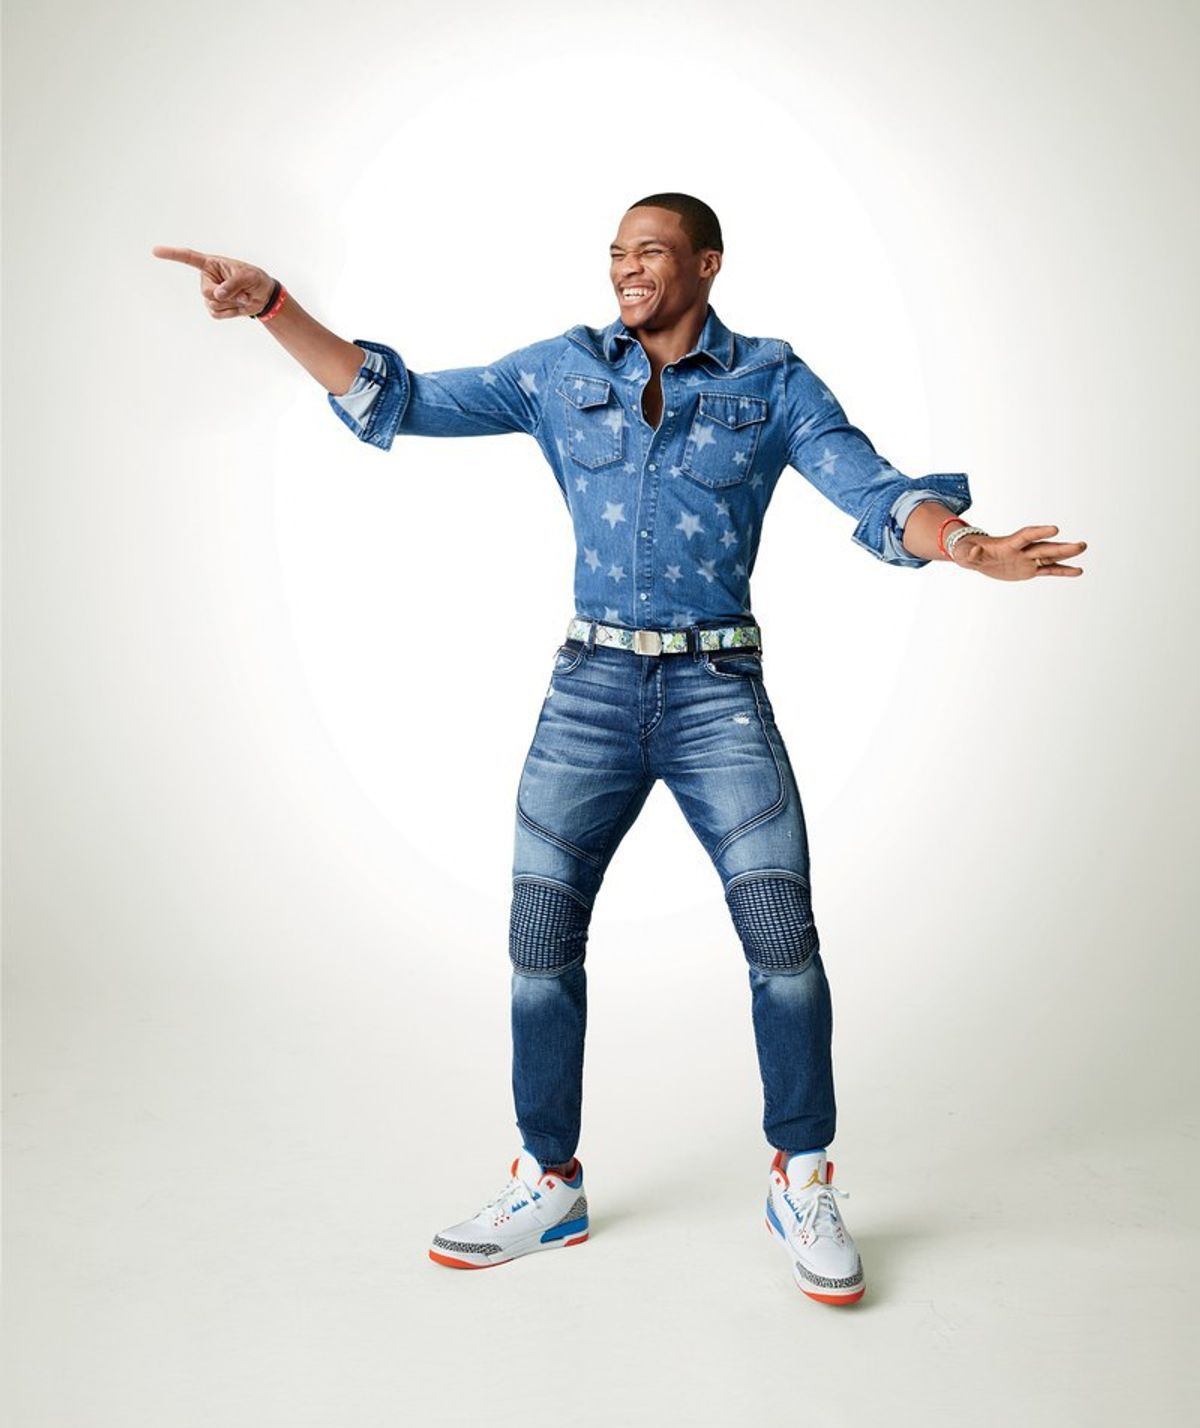 Russell Westbrook shines in GQ cover story